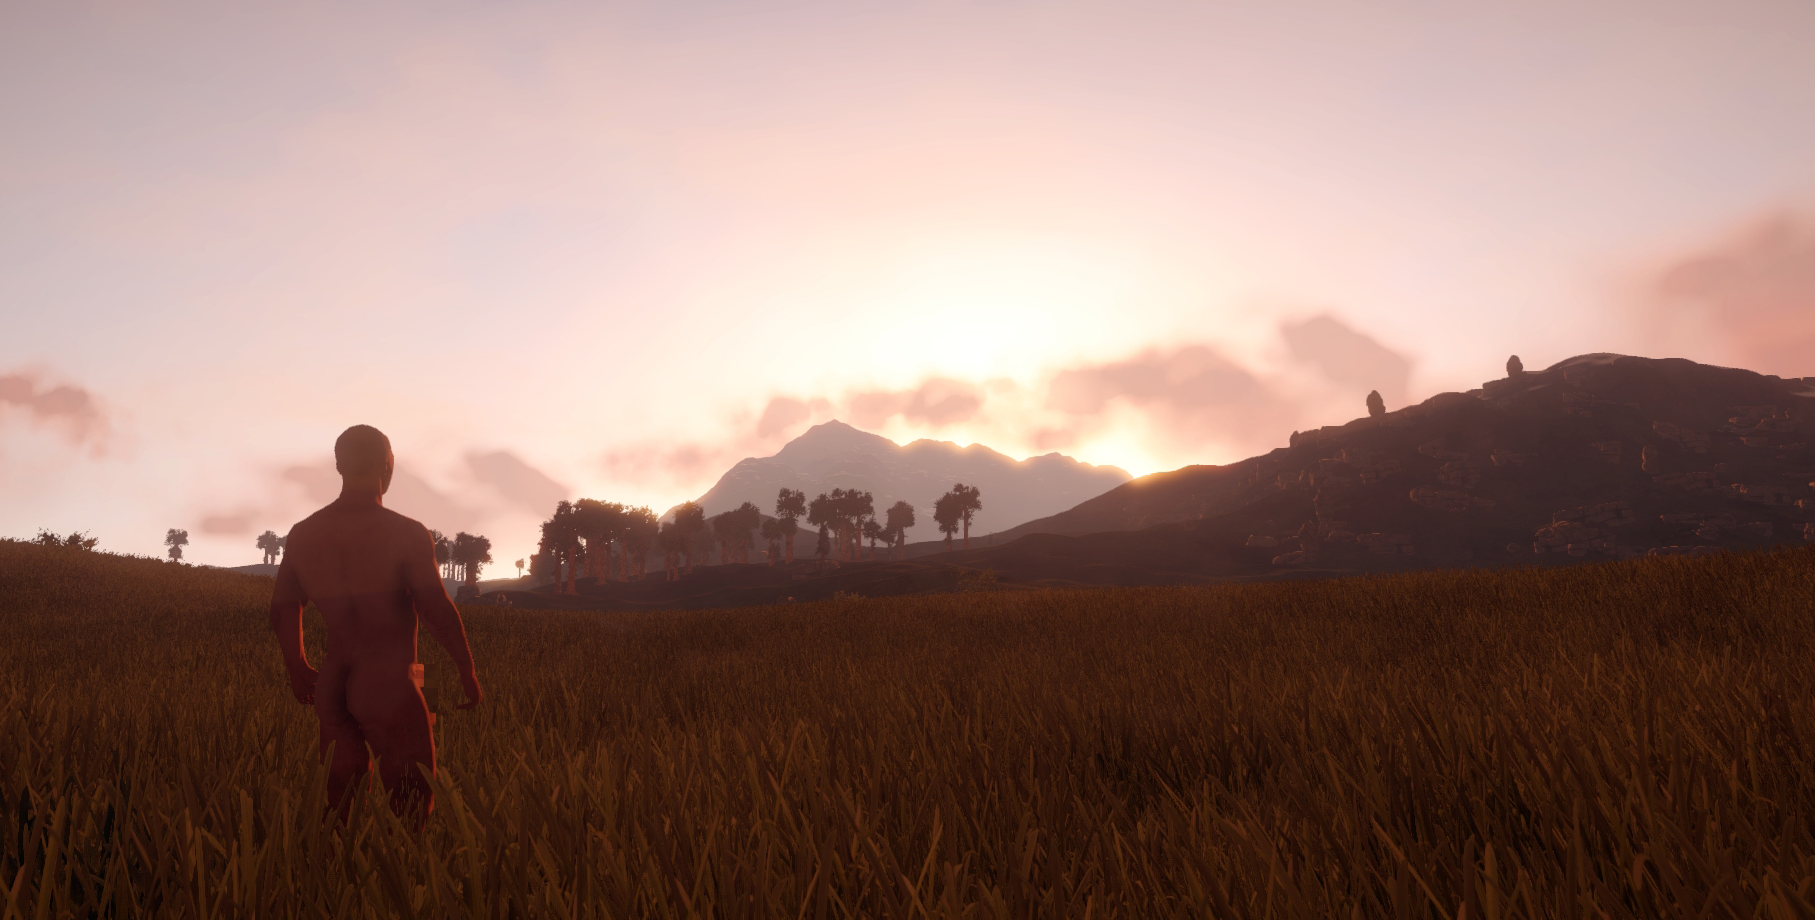 rust game for mac free download